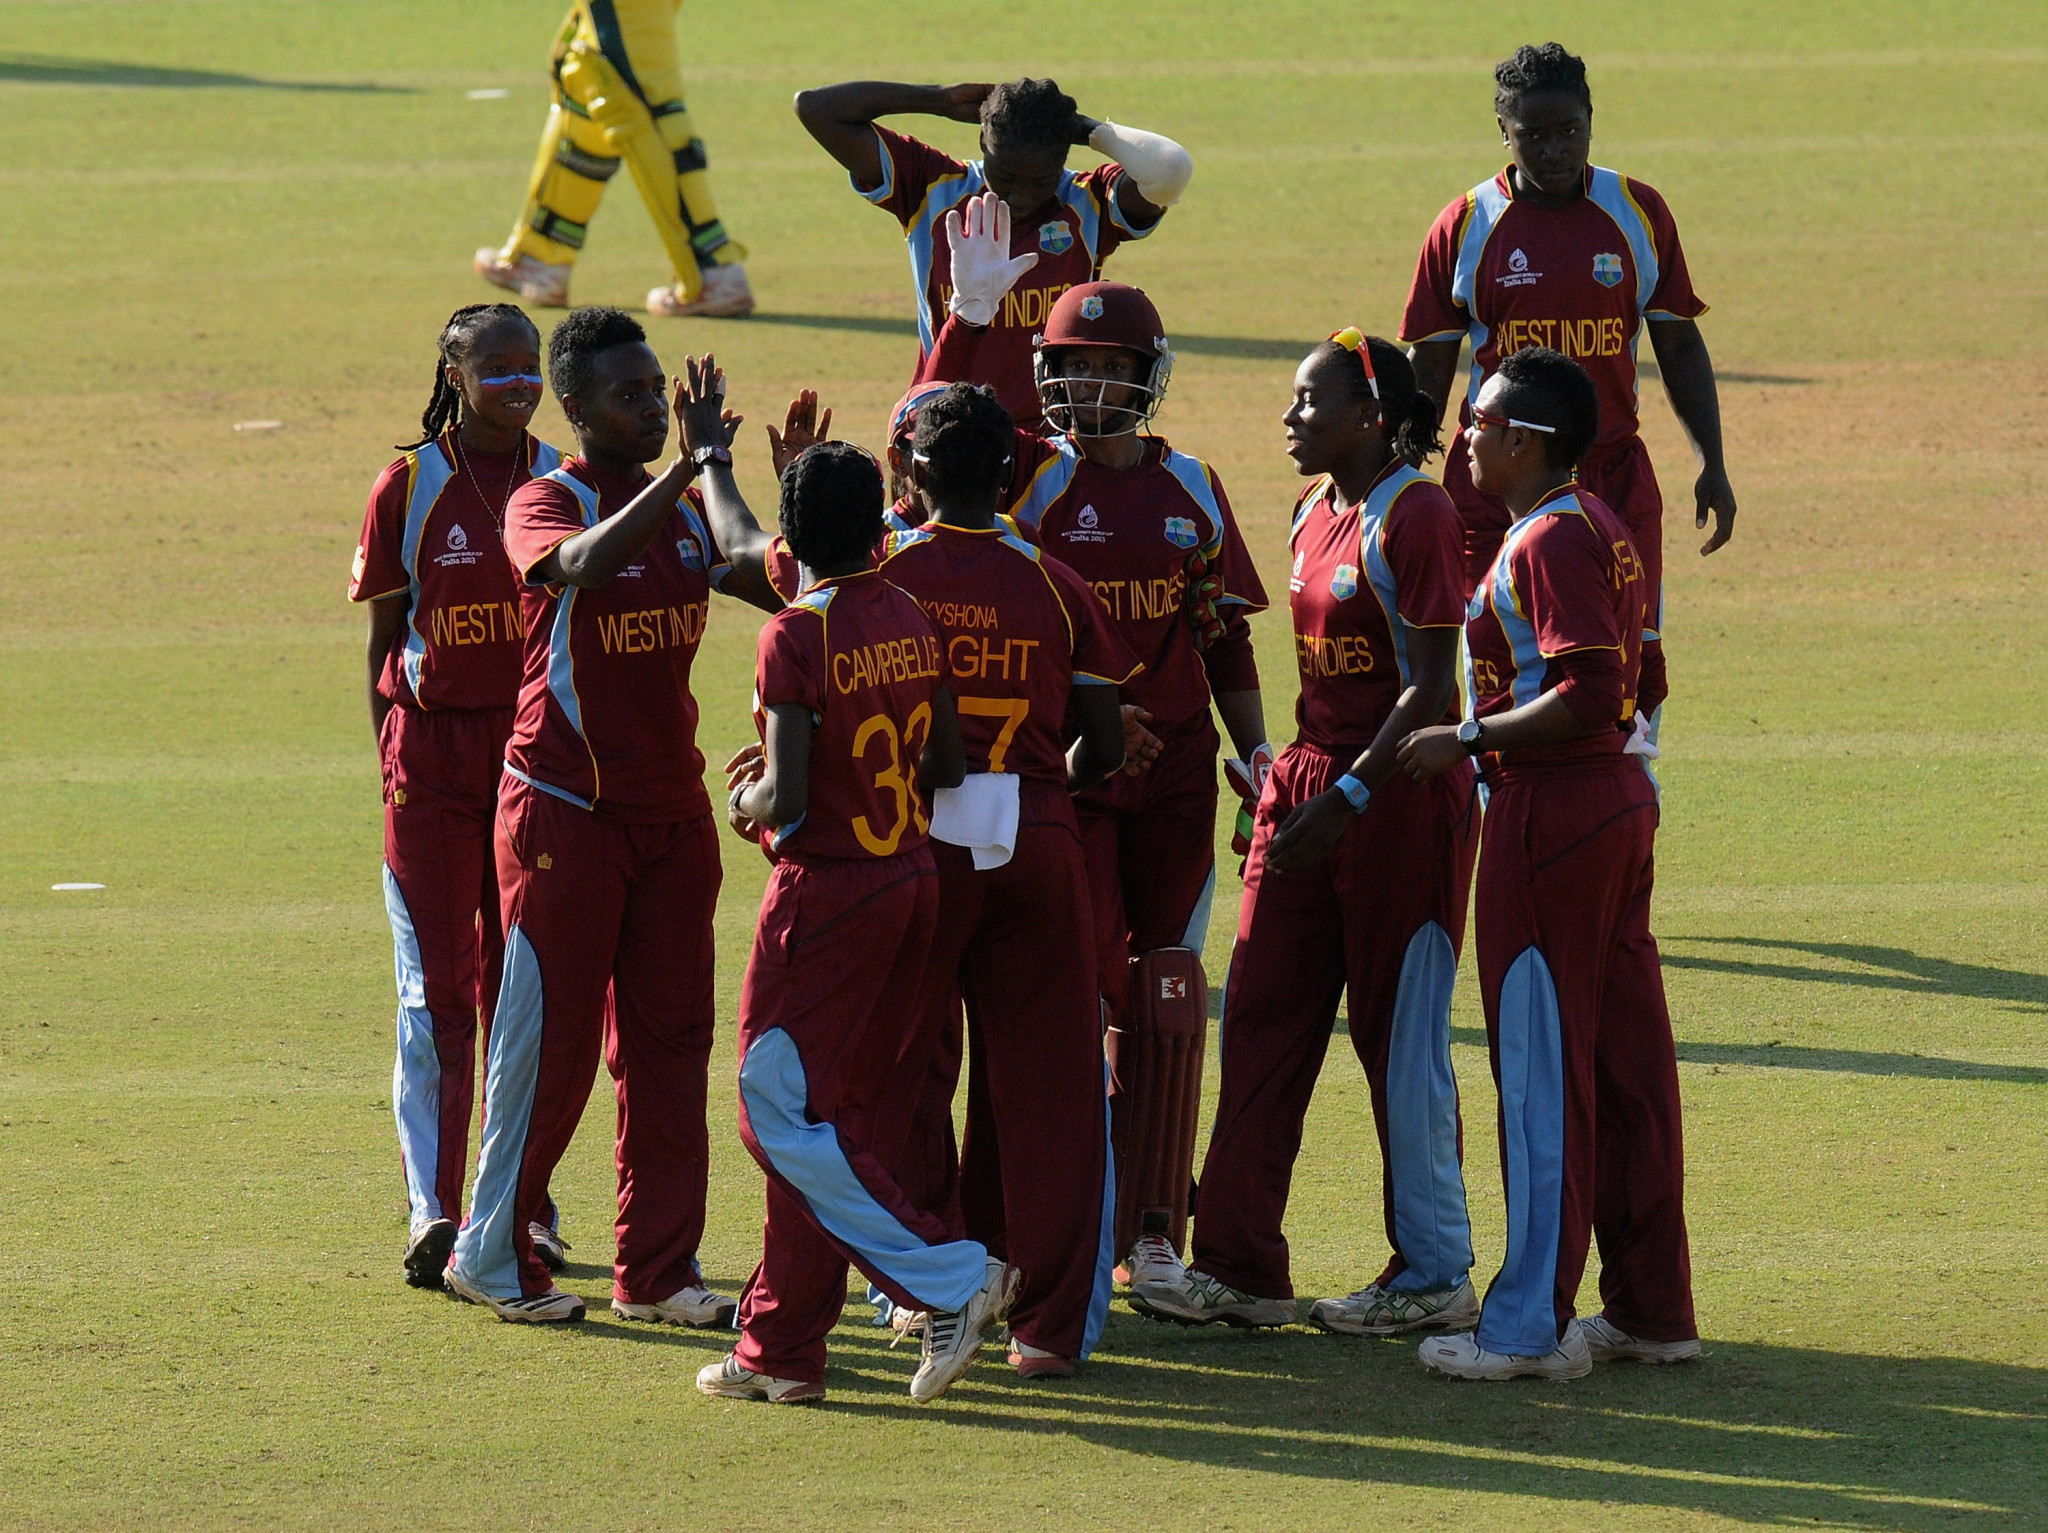 West Indies were runners-up at the 2013 ICC Women's Cricket World Cup ©Getty Images